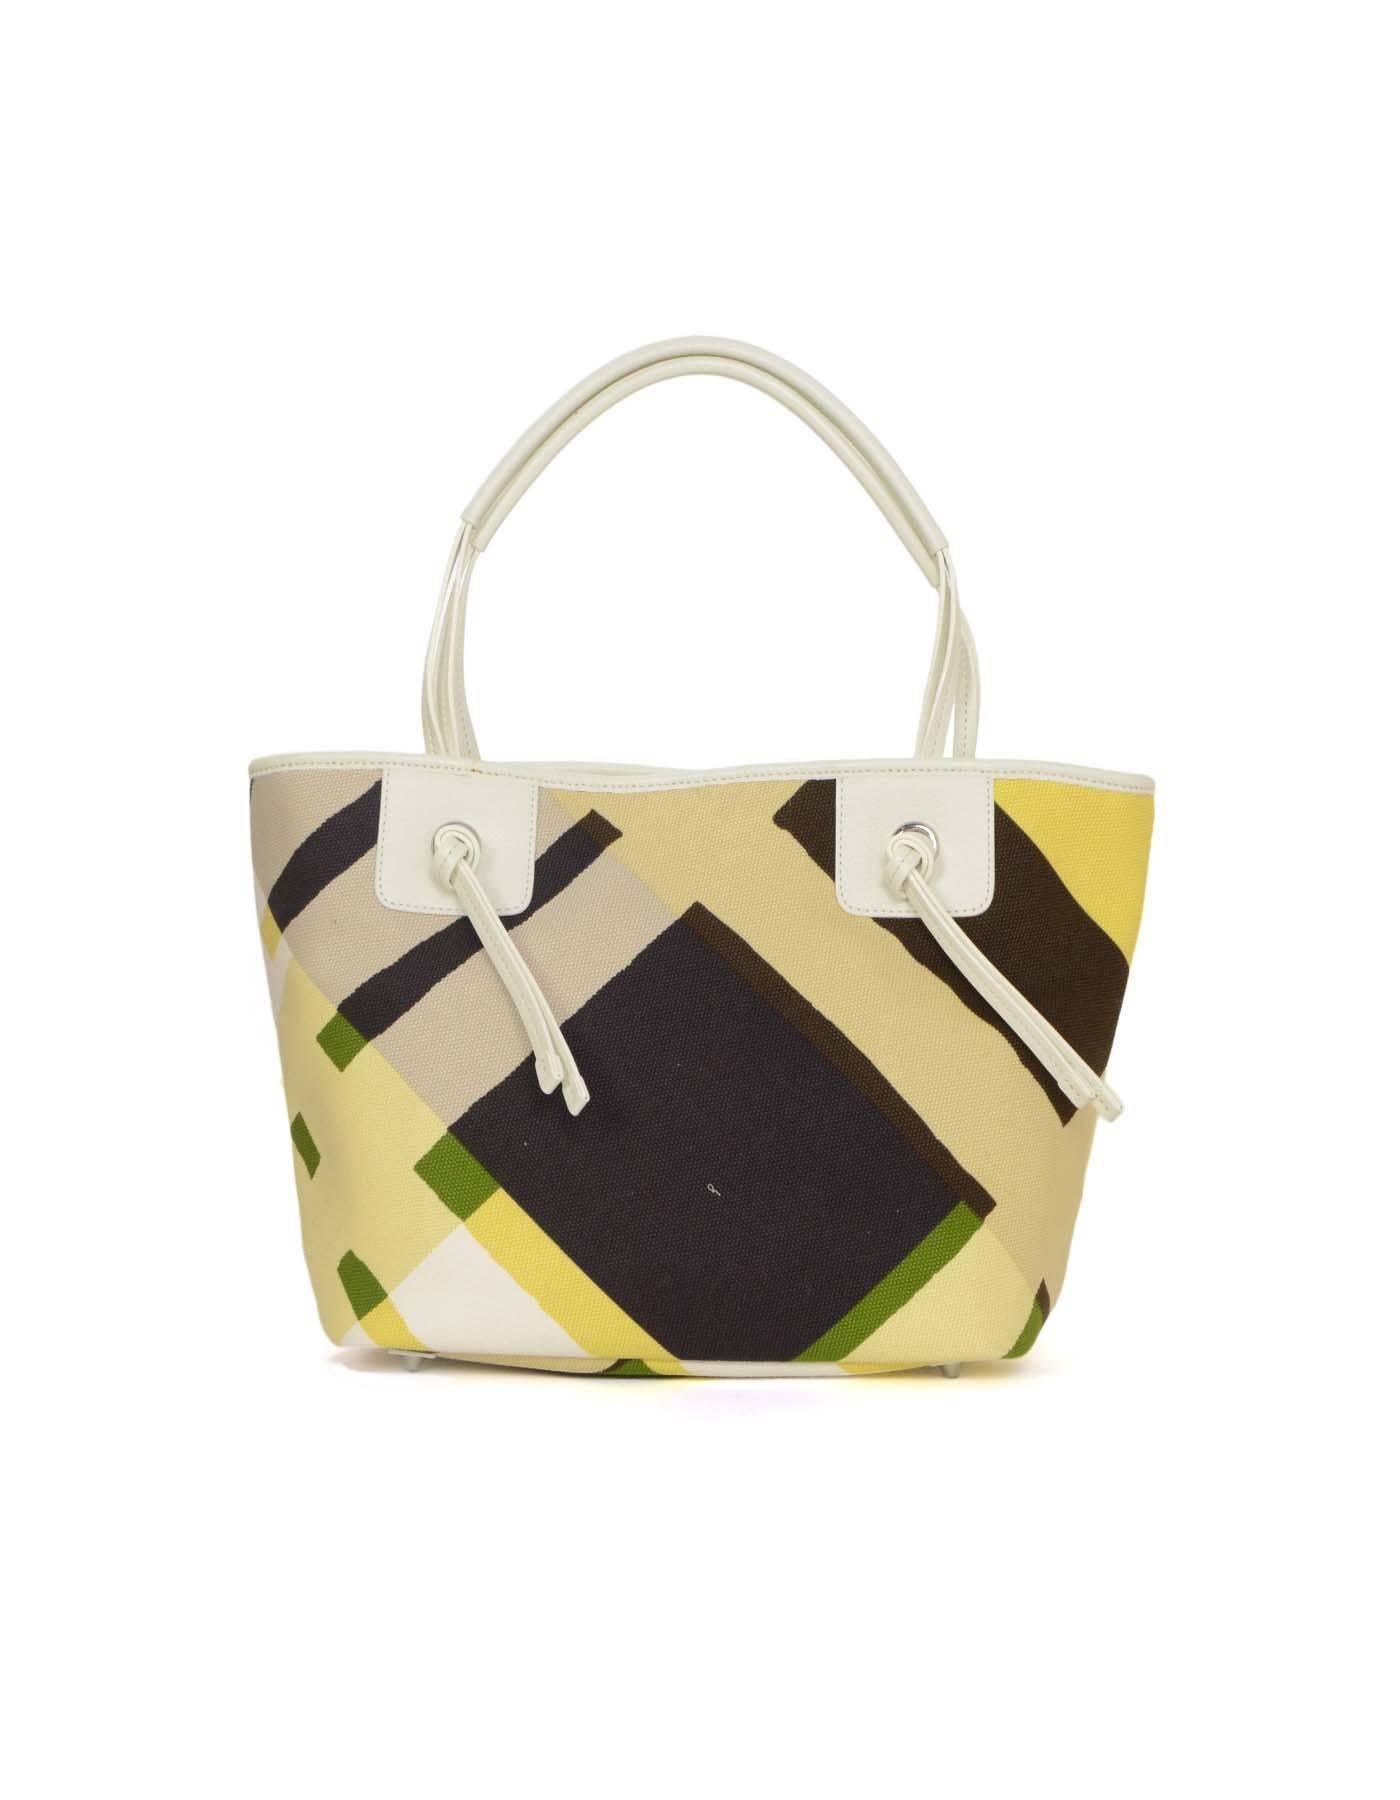 Beige Burberry New Multi-Colored Printed Canvas Tote Bag SHW